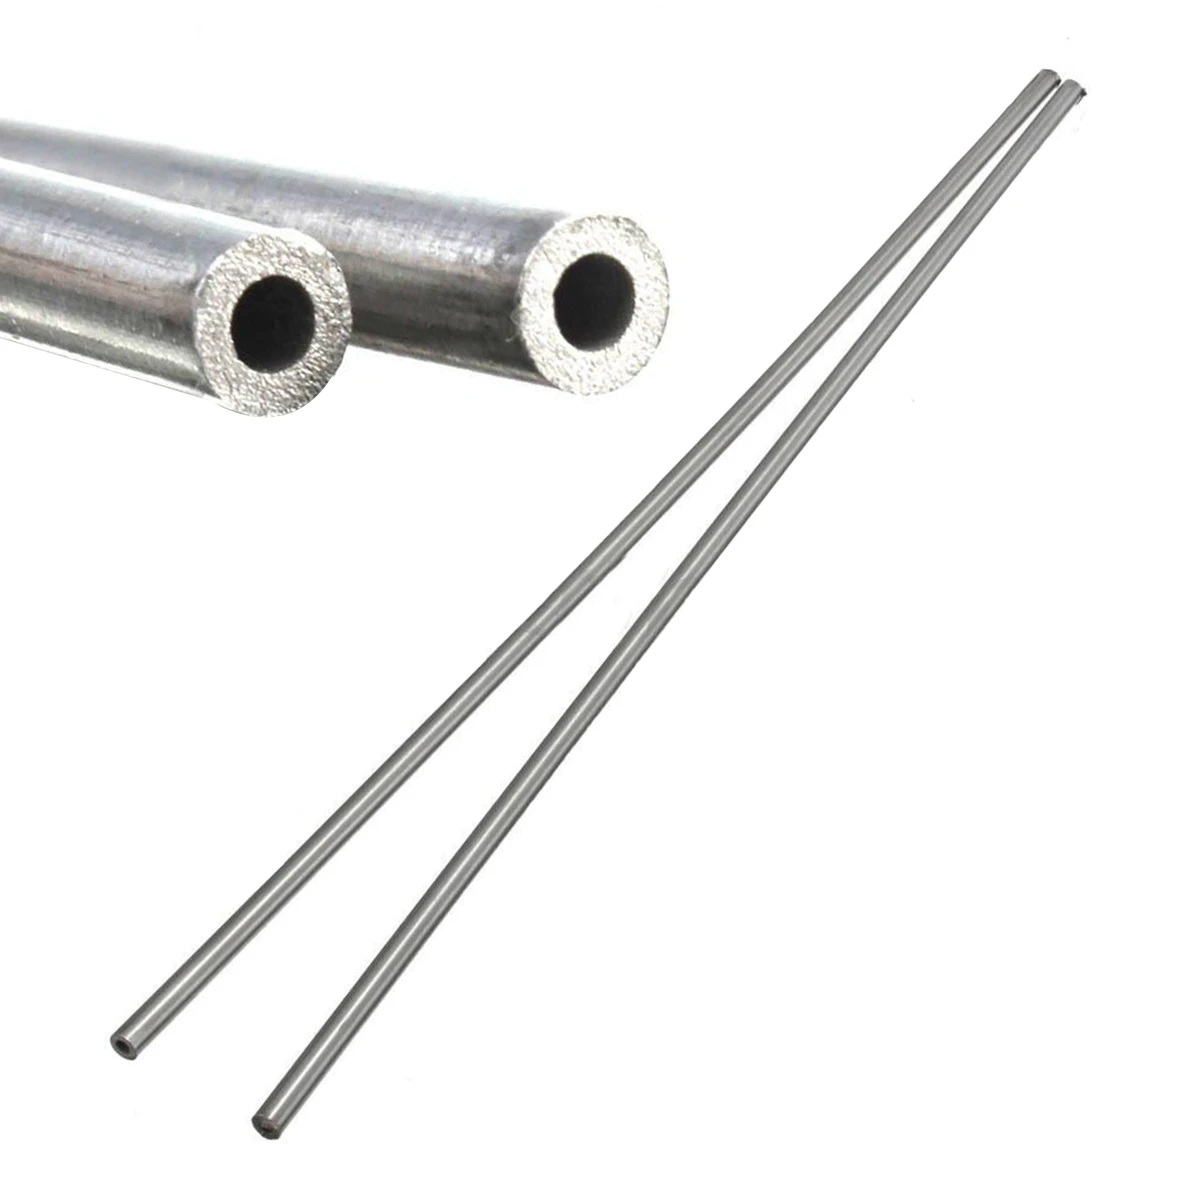 2pcs 304 Stainless Steel Capillary Tube Straight Pipe 3mm ID 4mm OD Length 250mm